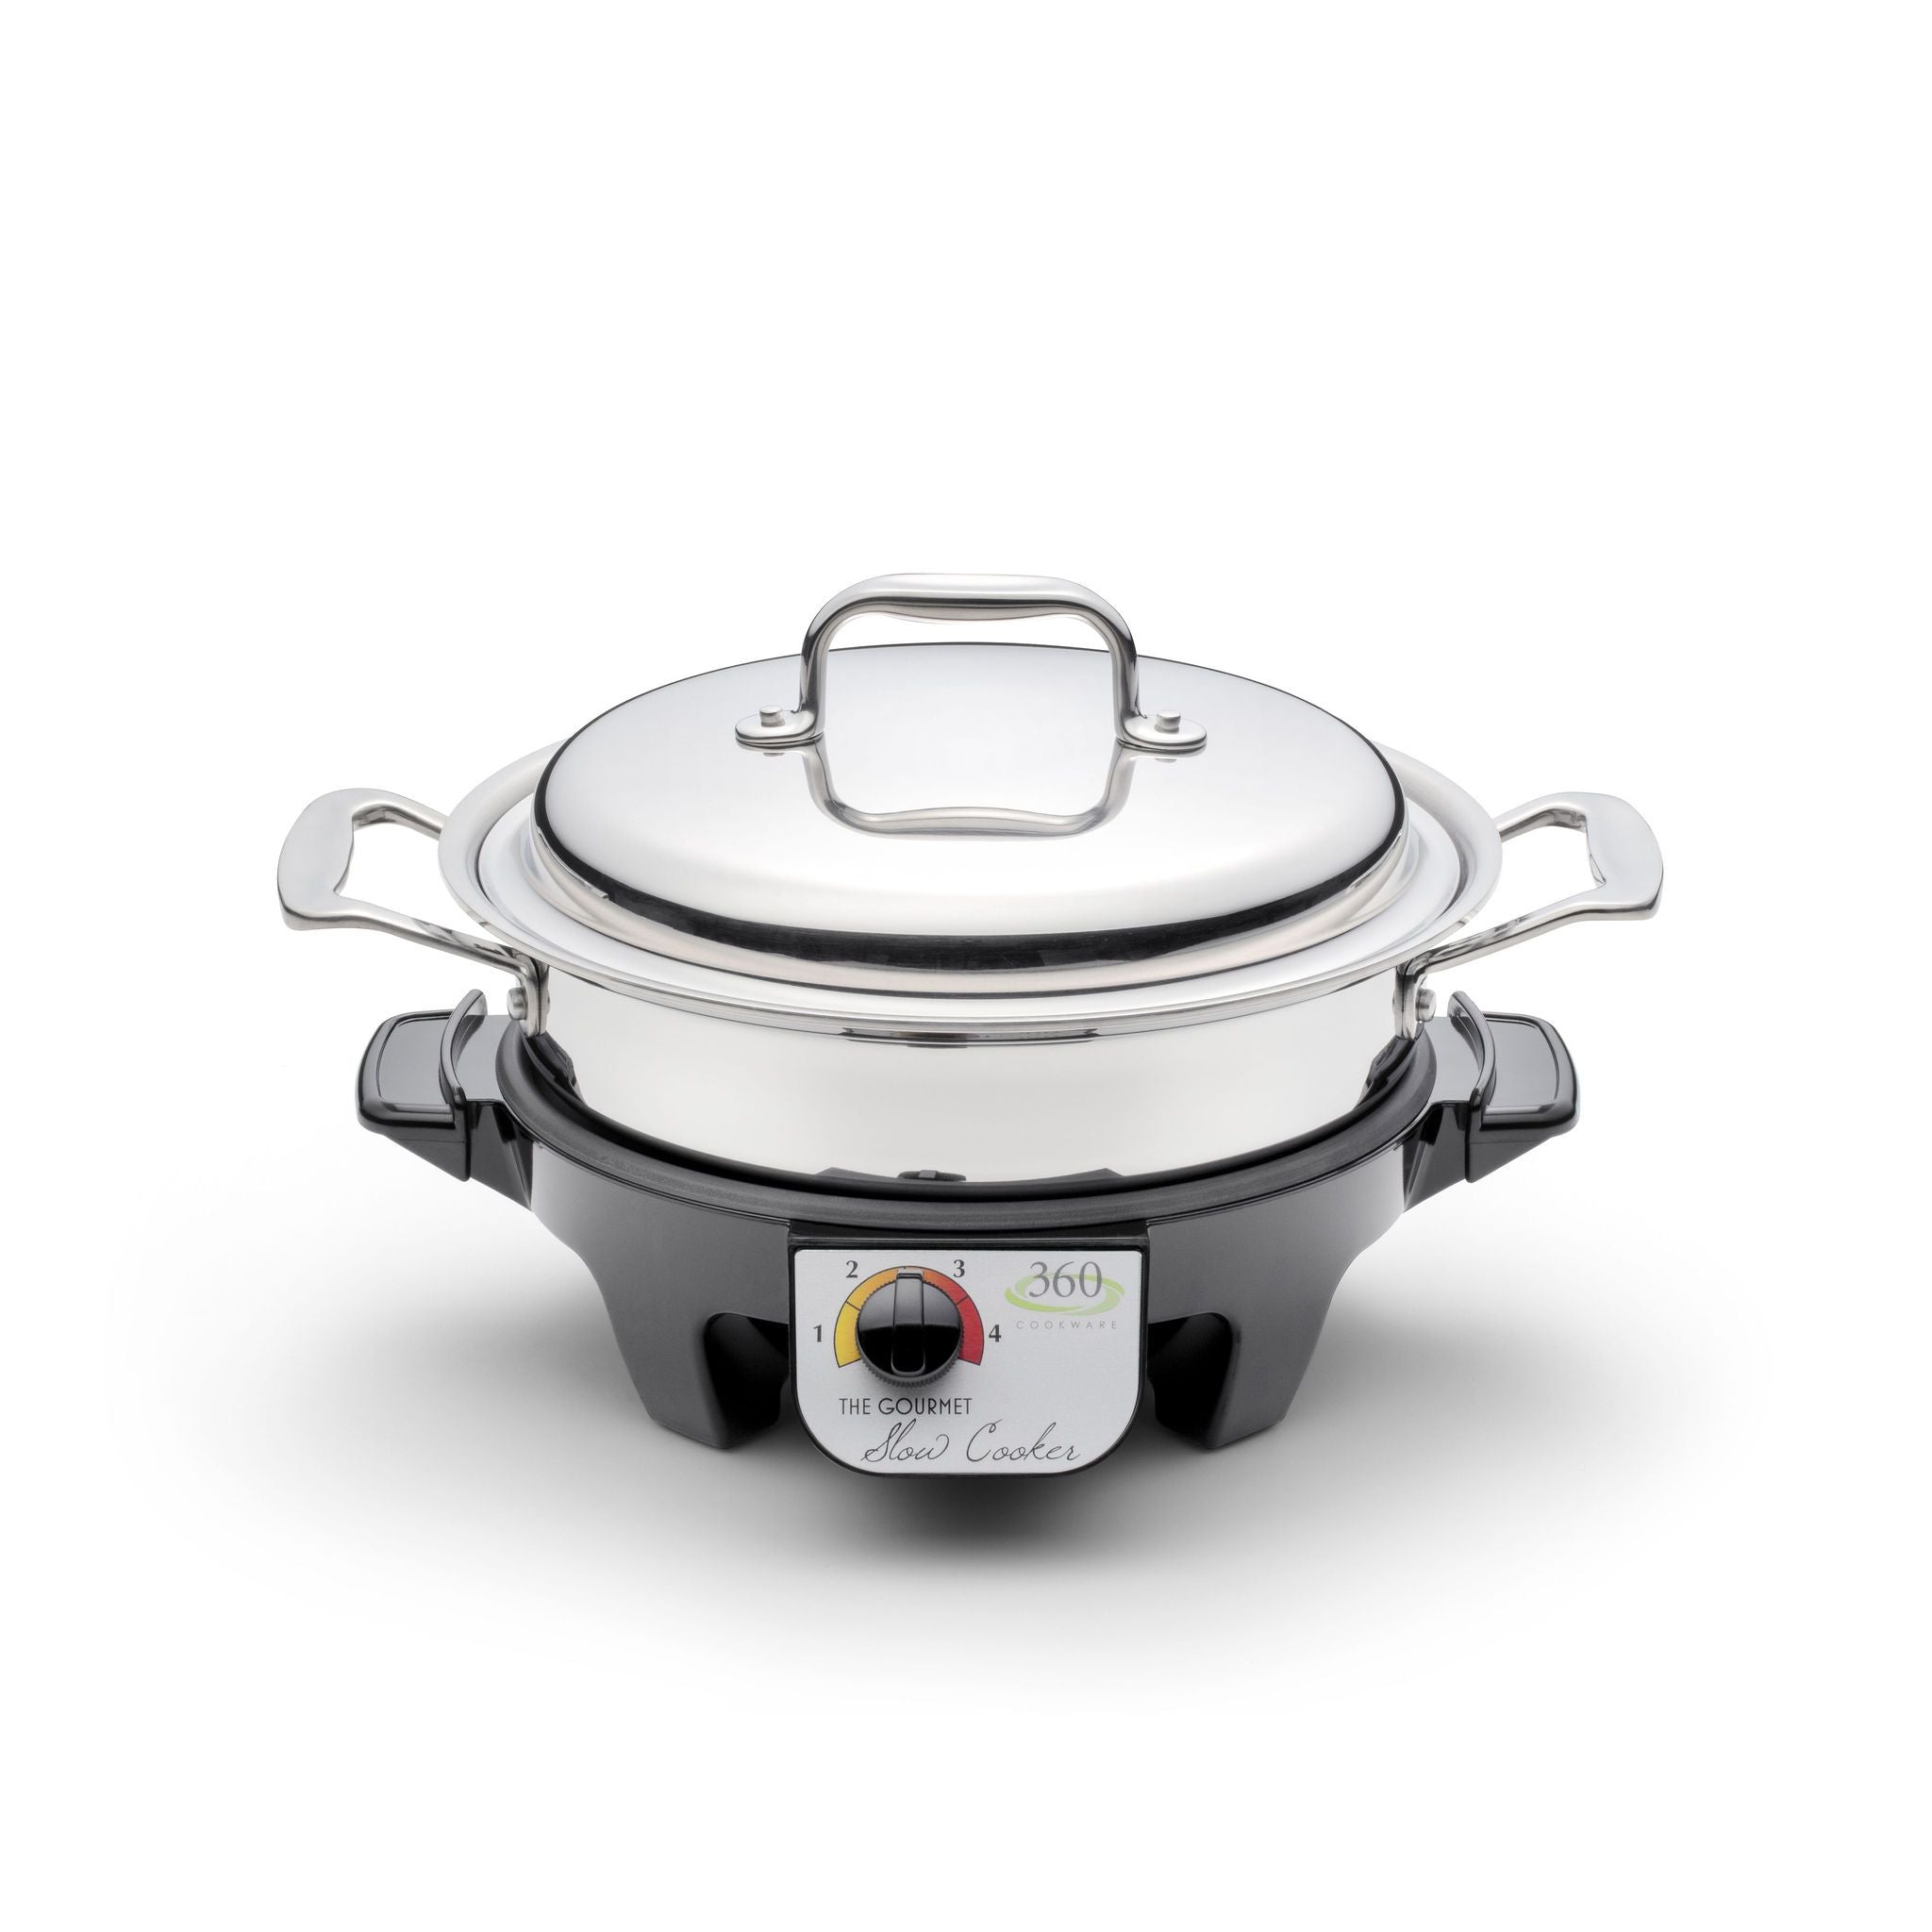 West Bend Slow Cooker 4 Quart With Griddle Base off White and